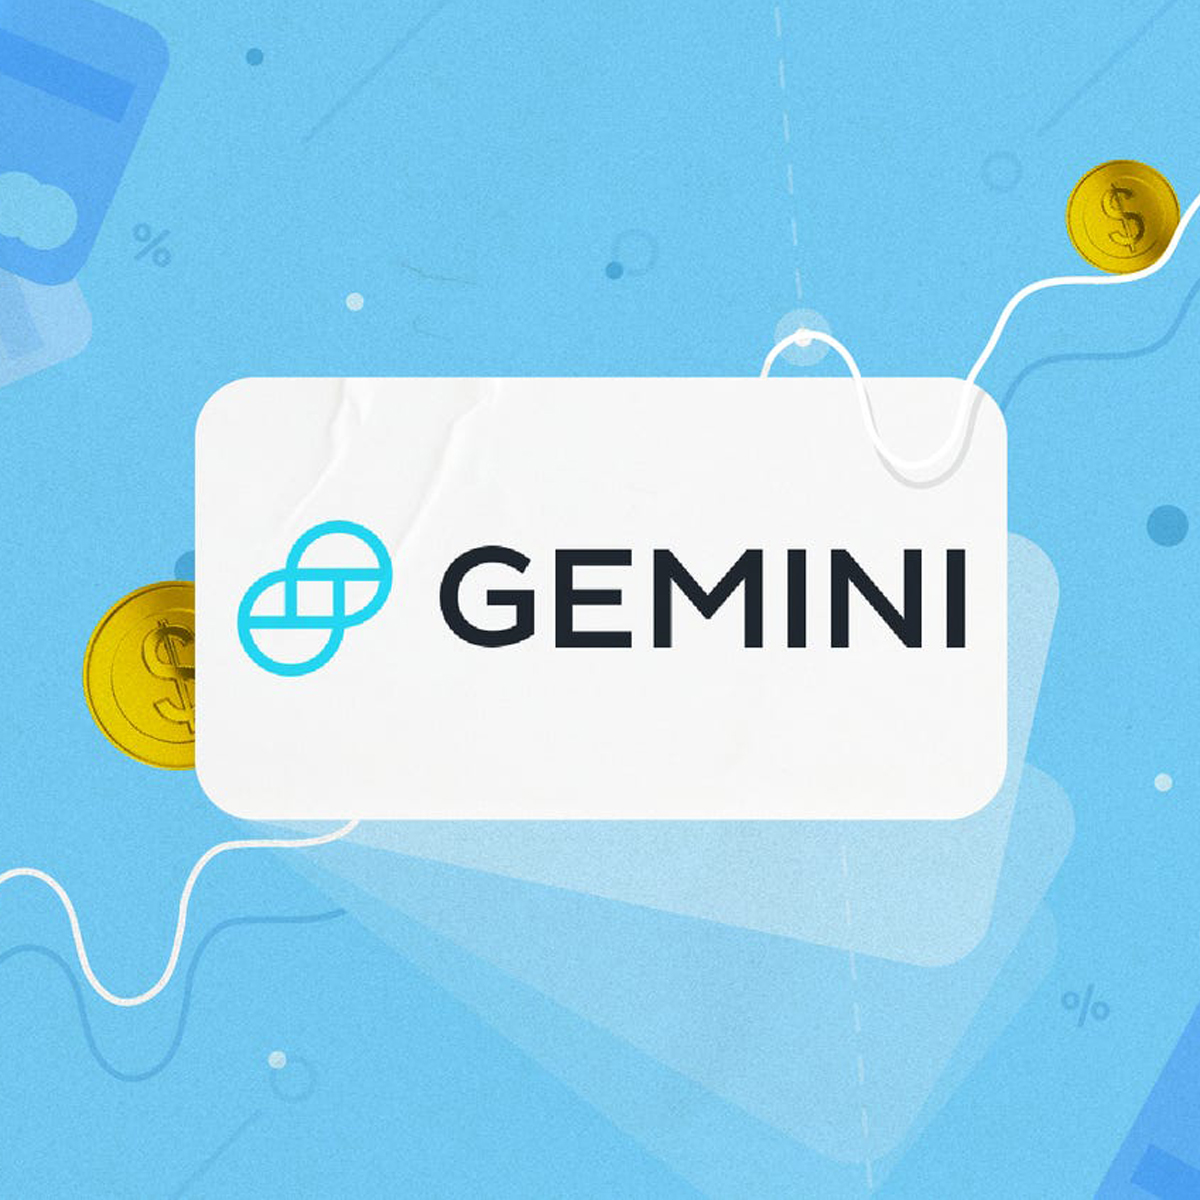 Gemini - Cryptocurrency Exchange to Buy Bitcoin and Ether